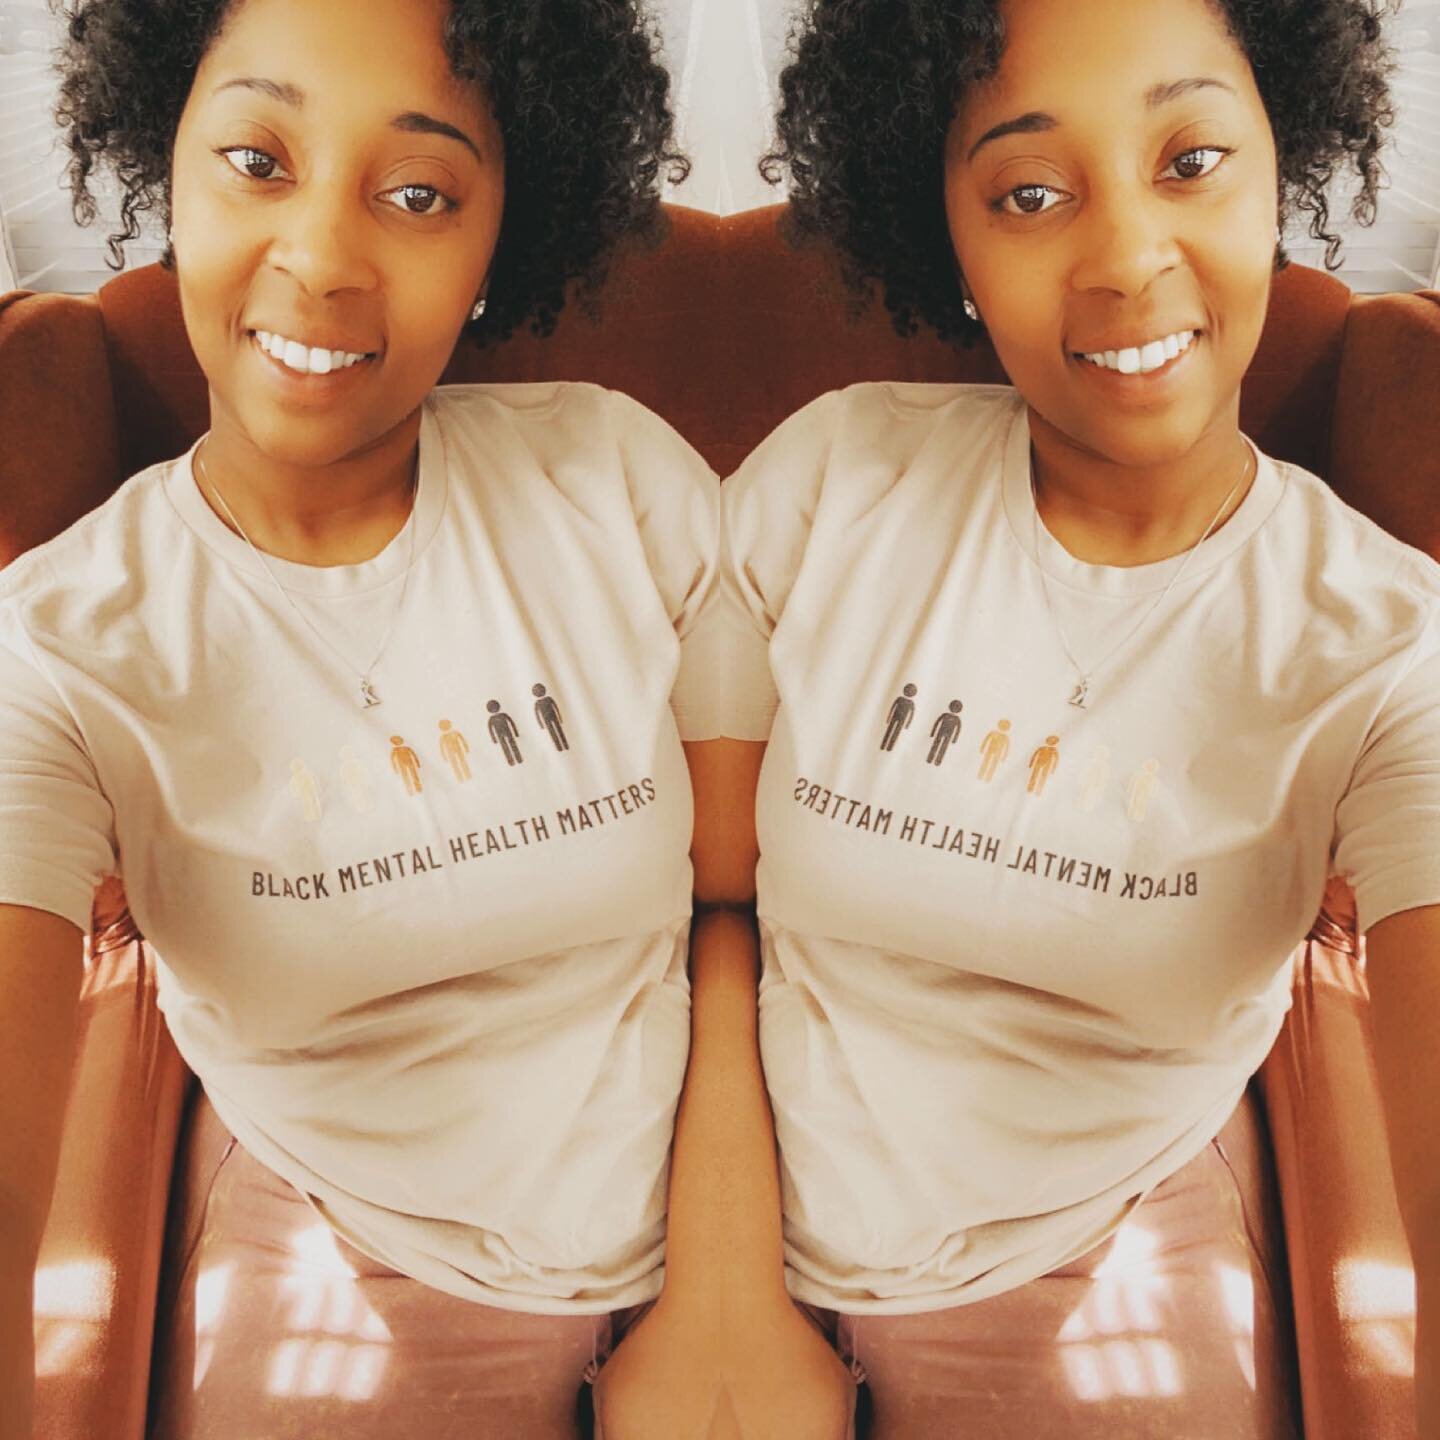 BLACK 🤎 MENTAL 🤎HEALTH 🤎 MATTERS - Follow @therateeshirts  for more mental health posts &amp; T-shirts 🖤
.
.
.
.
#blackmentalhealthadvocate #blackmentalhealthawareness #blackmentalwellness #blackmentalhealthprofessional #blackcounselors #blackdoc